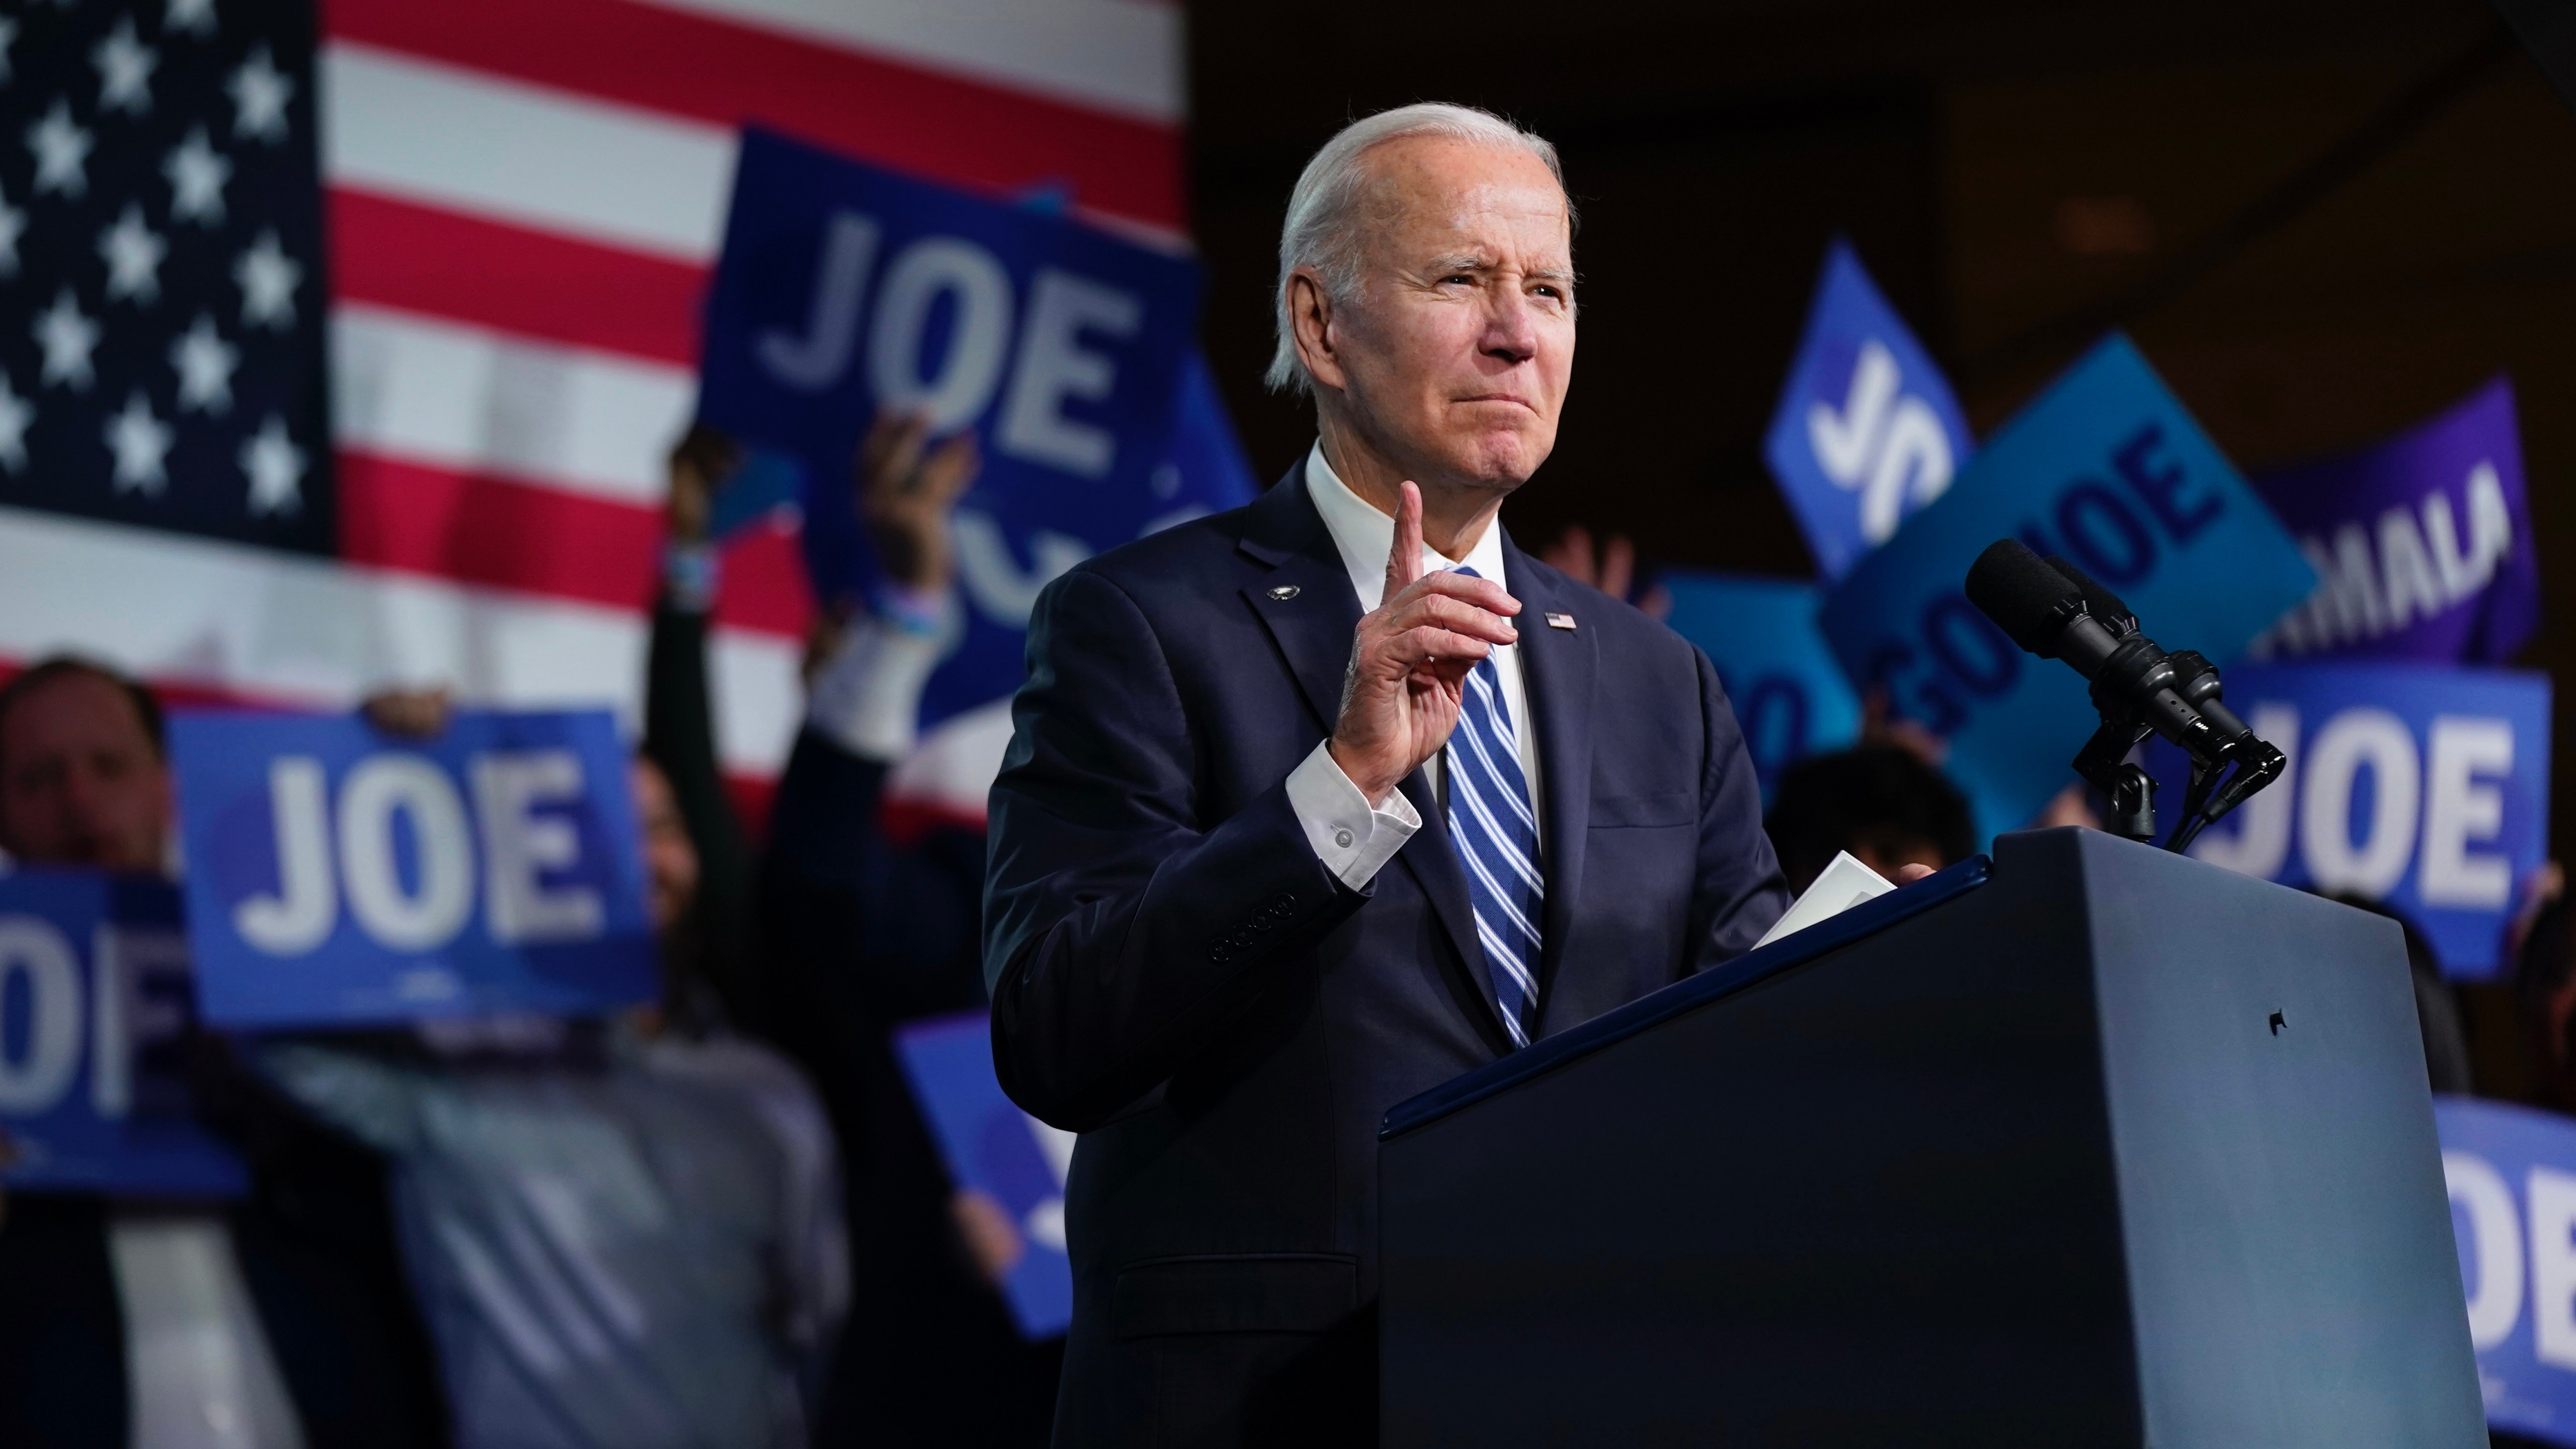 Biden has still not visited East Palestine, a month after saying he would “eventually.”